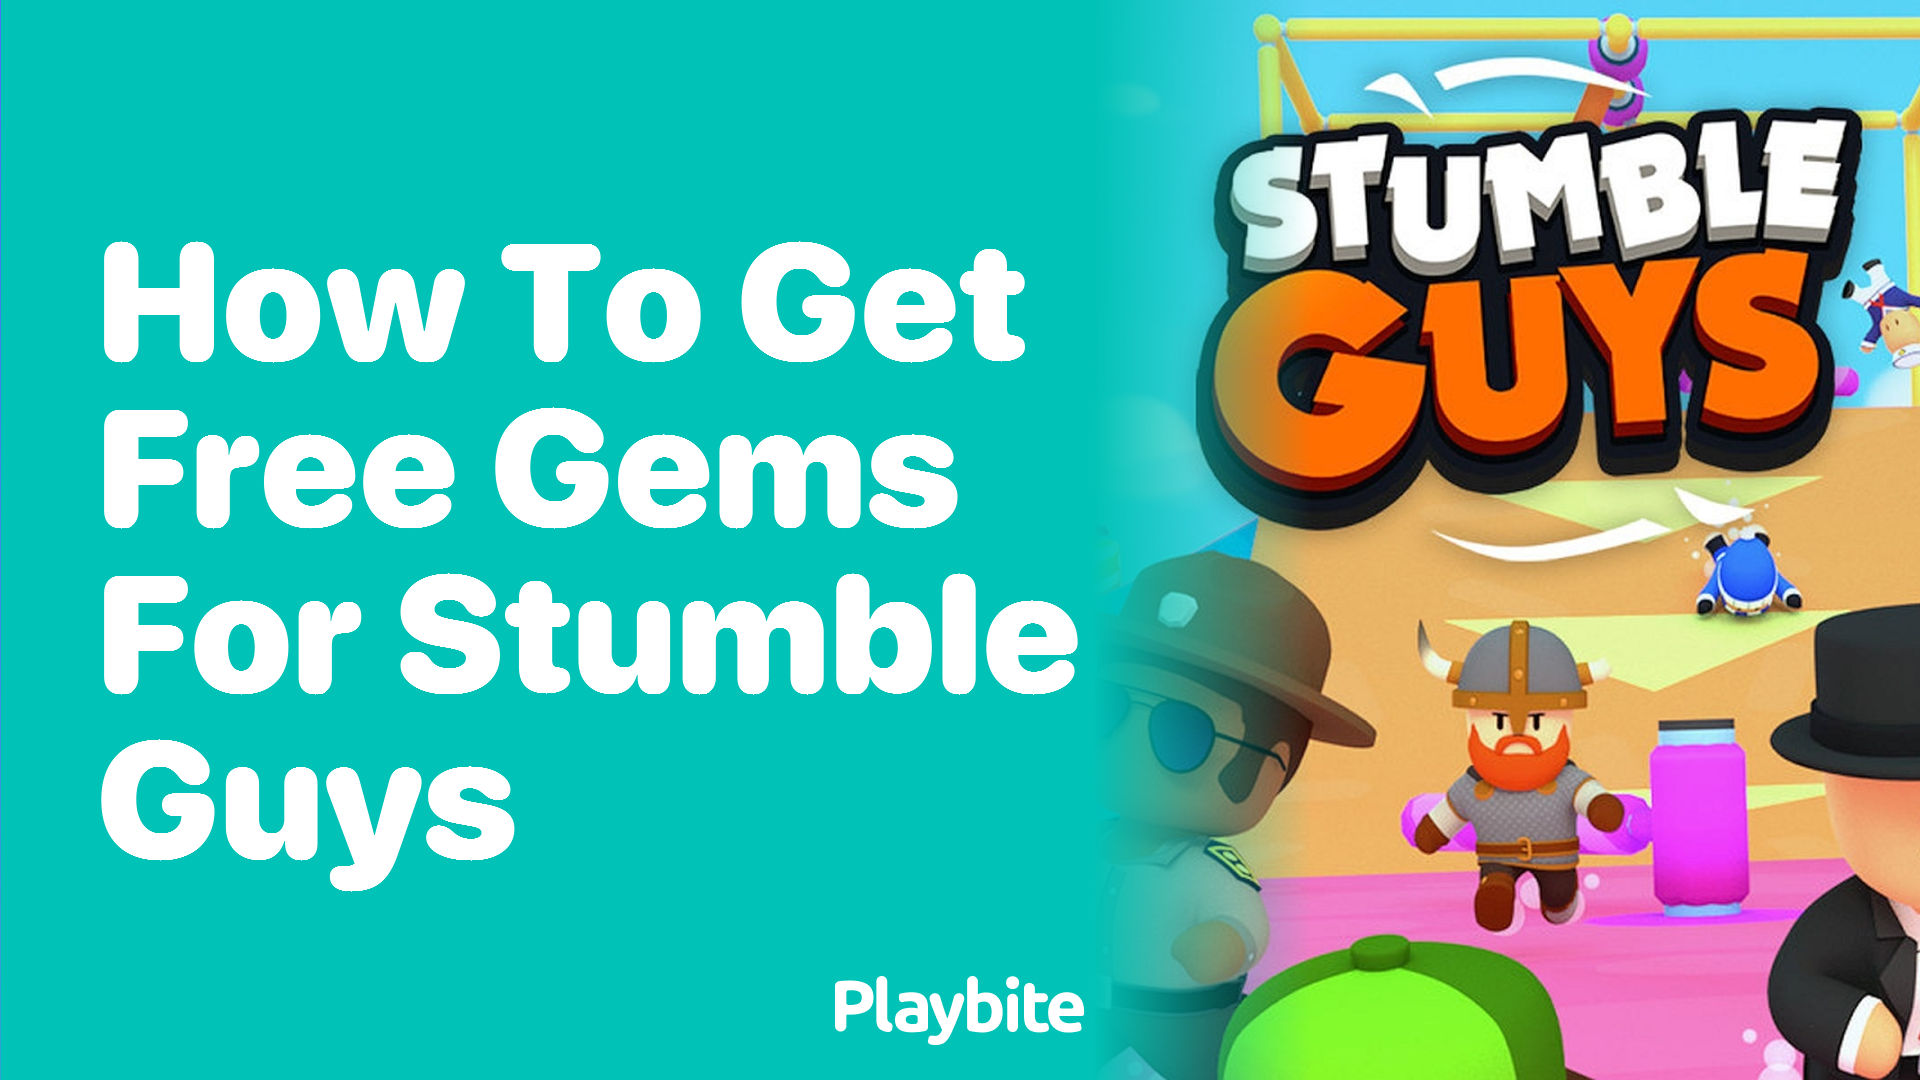 How to Get Free Gems for Stumble Guys